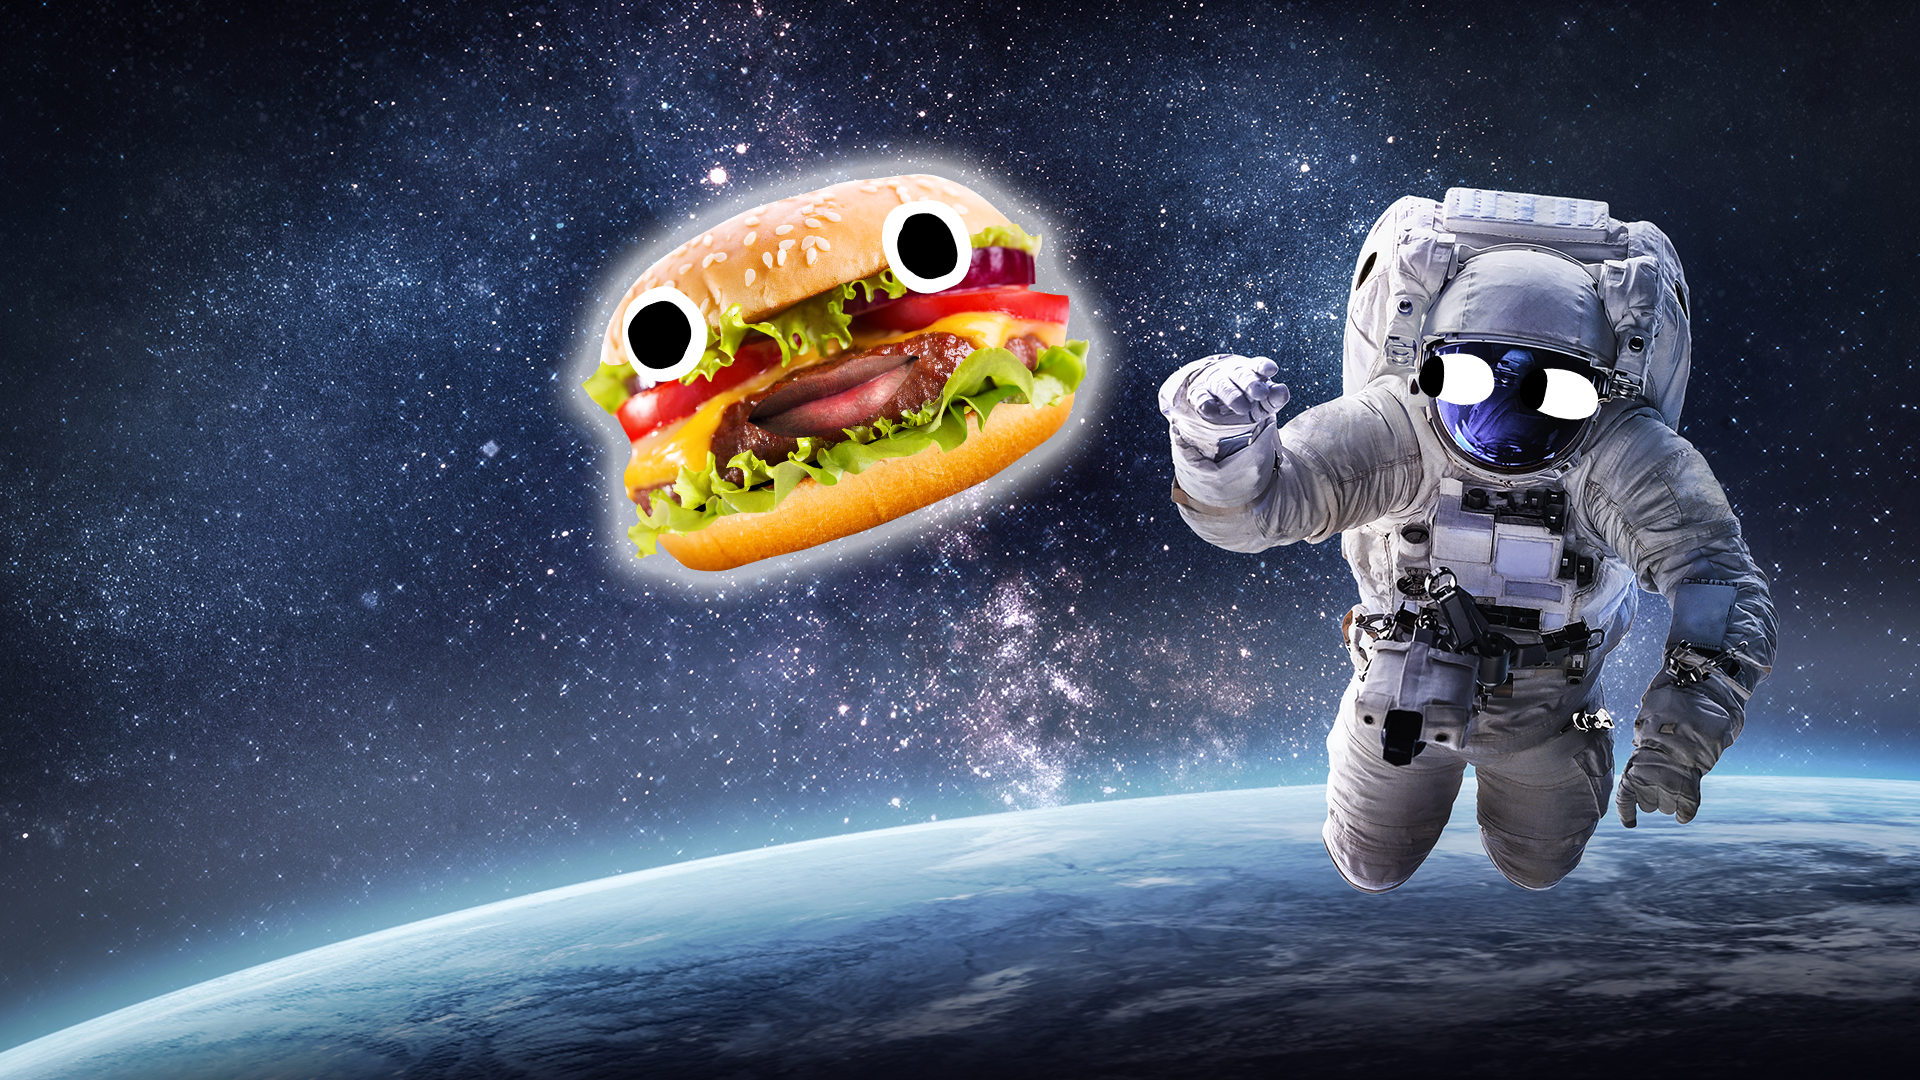 A spaceman in space eating a burger